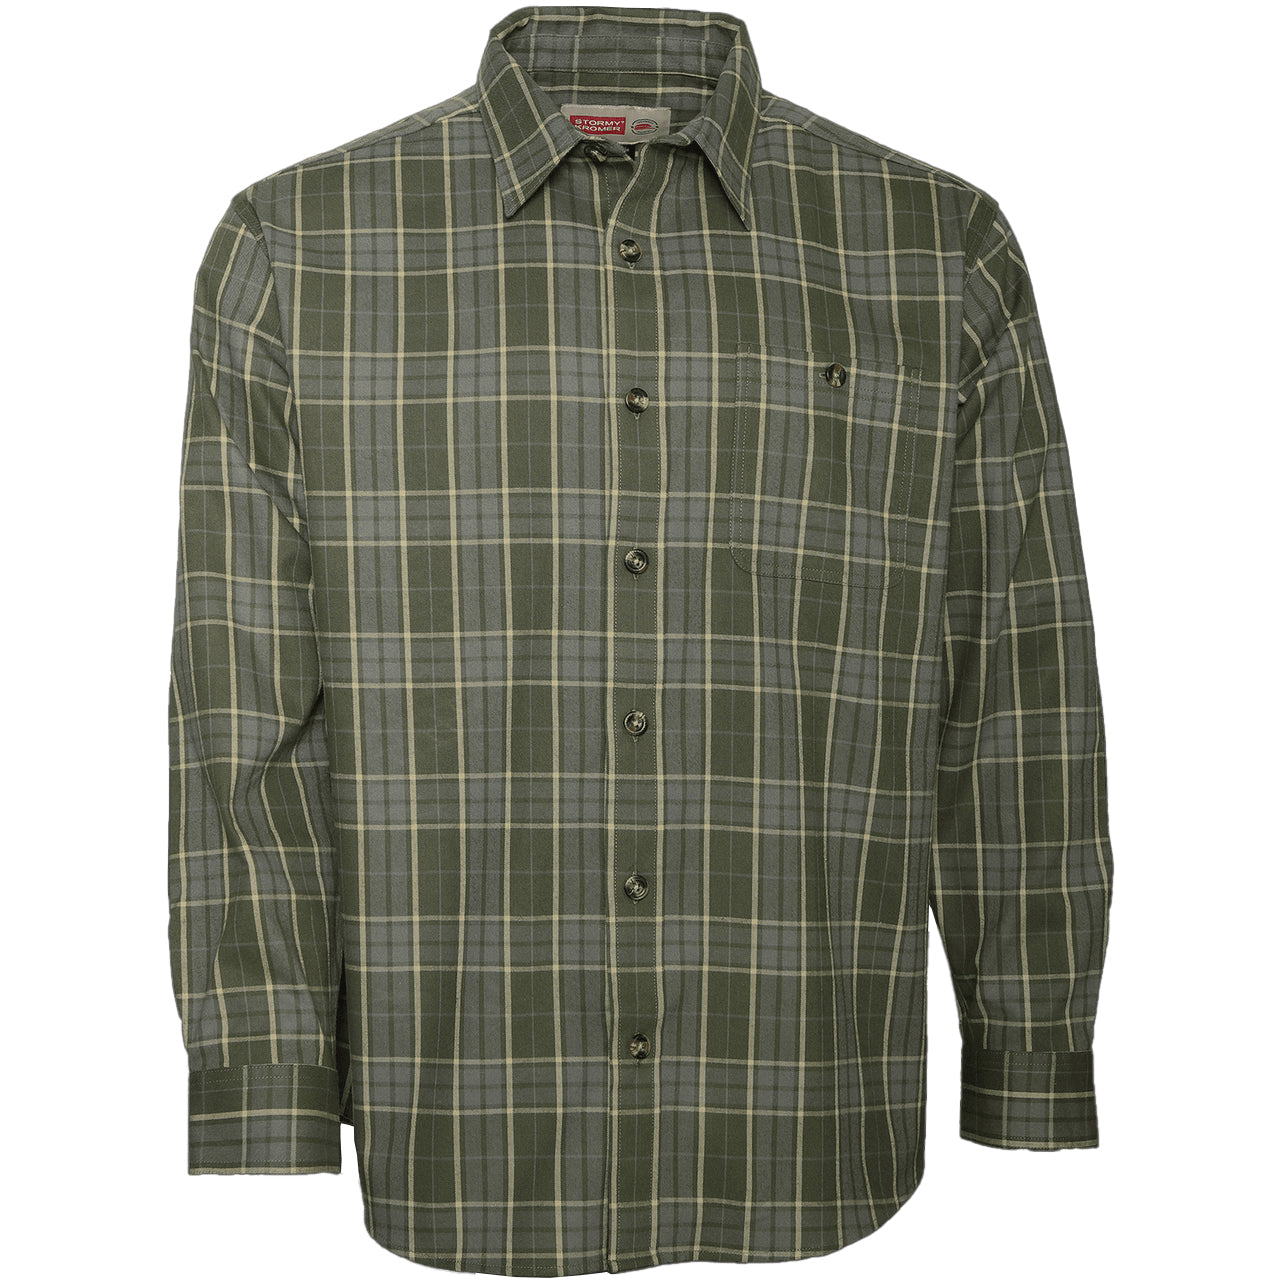 Stormy Kromer Flannel Shirt in Rubbed Sage Plaid